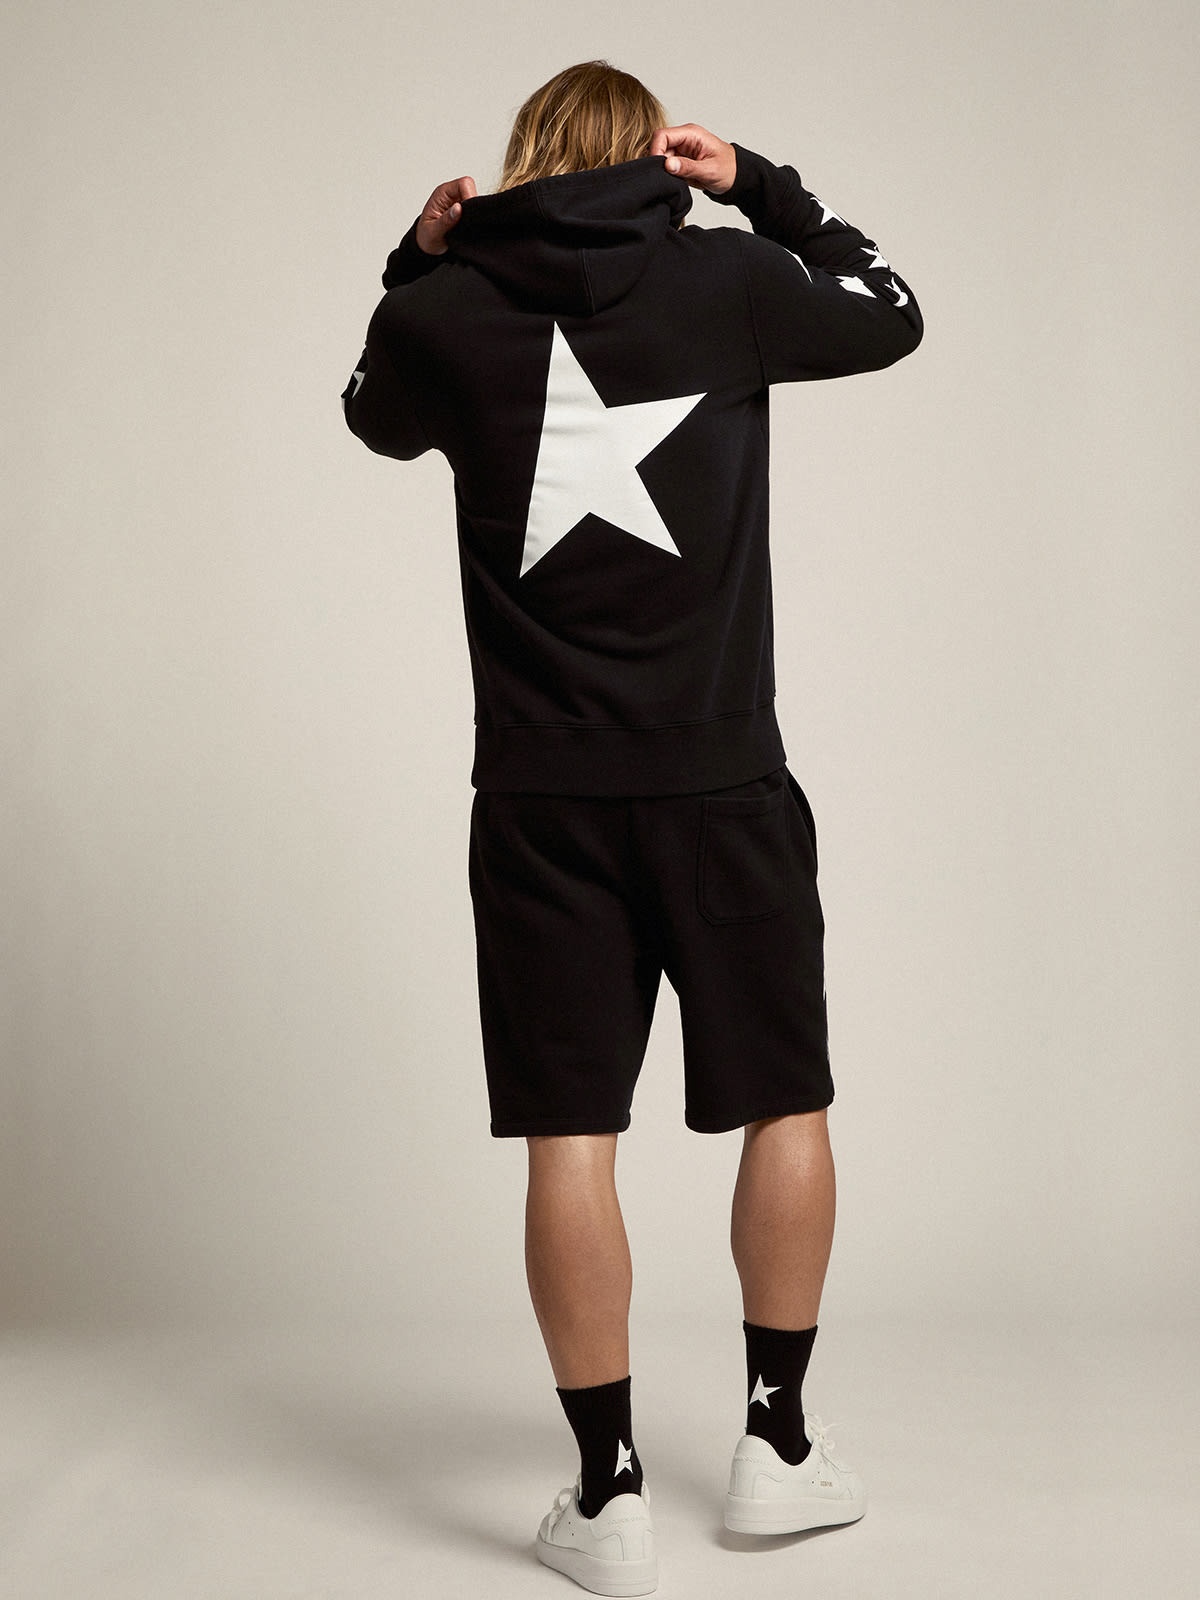 Black Alighiero Star Collection sweatshirt with contrasting white stars - 4